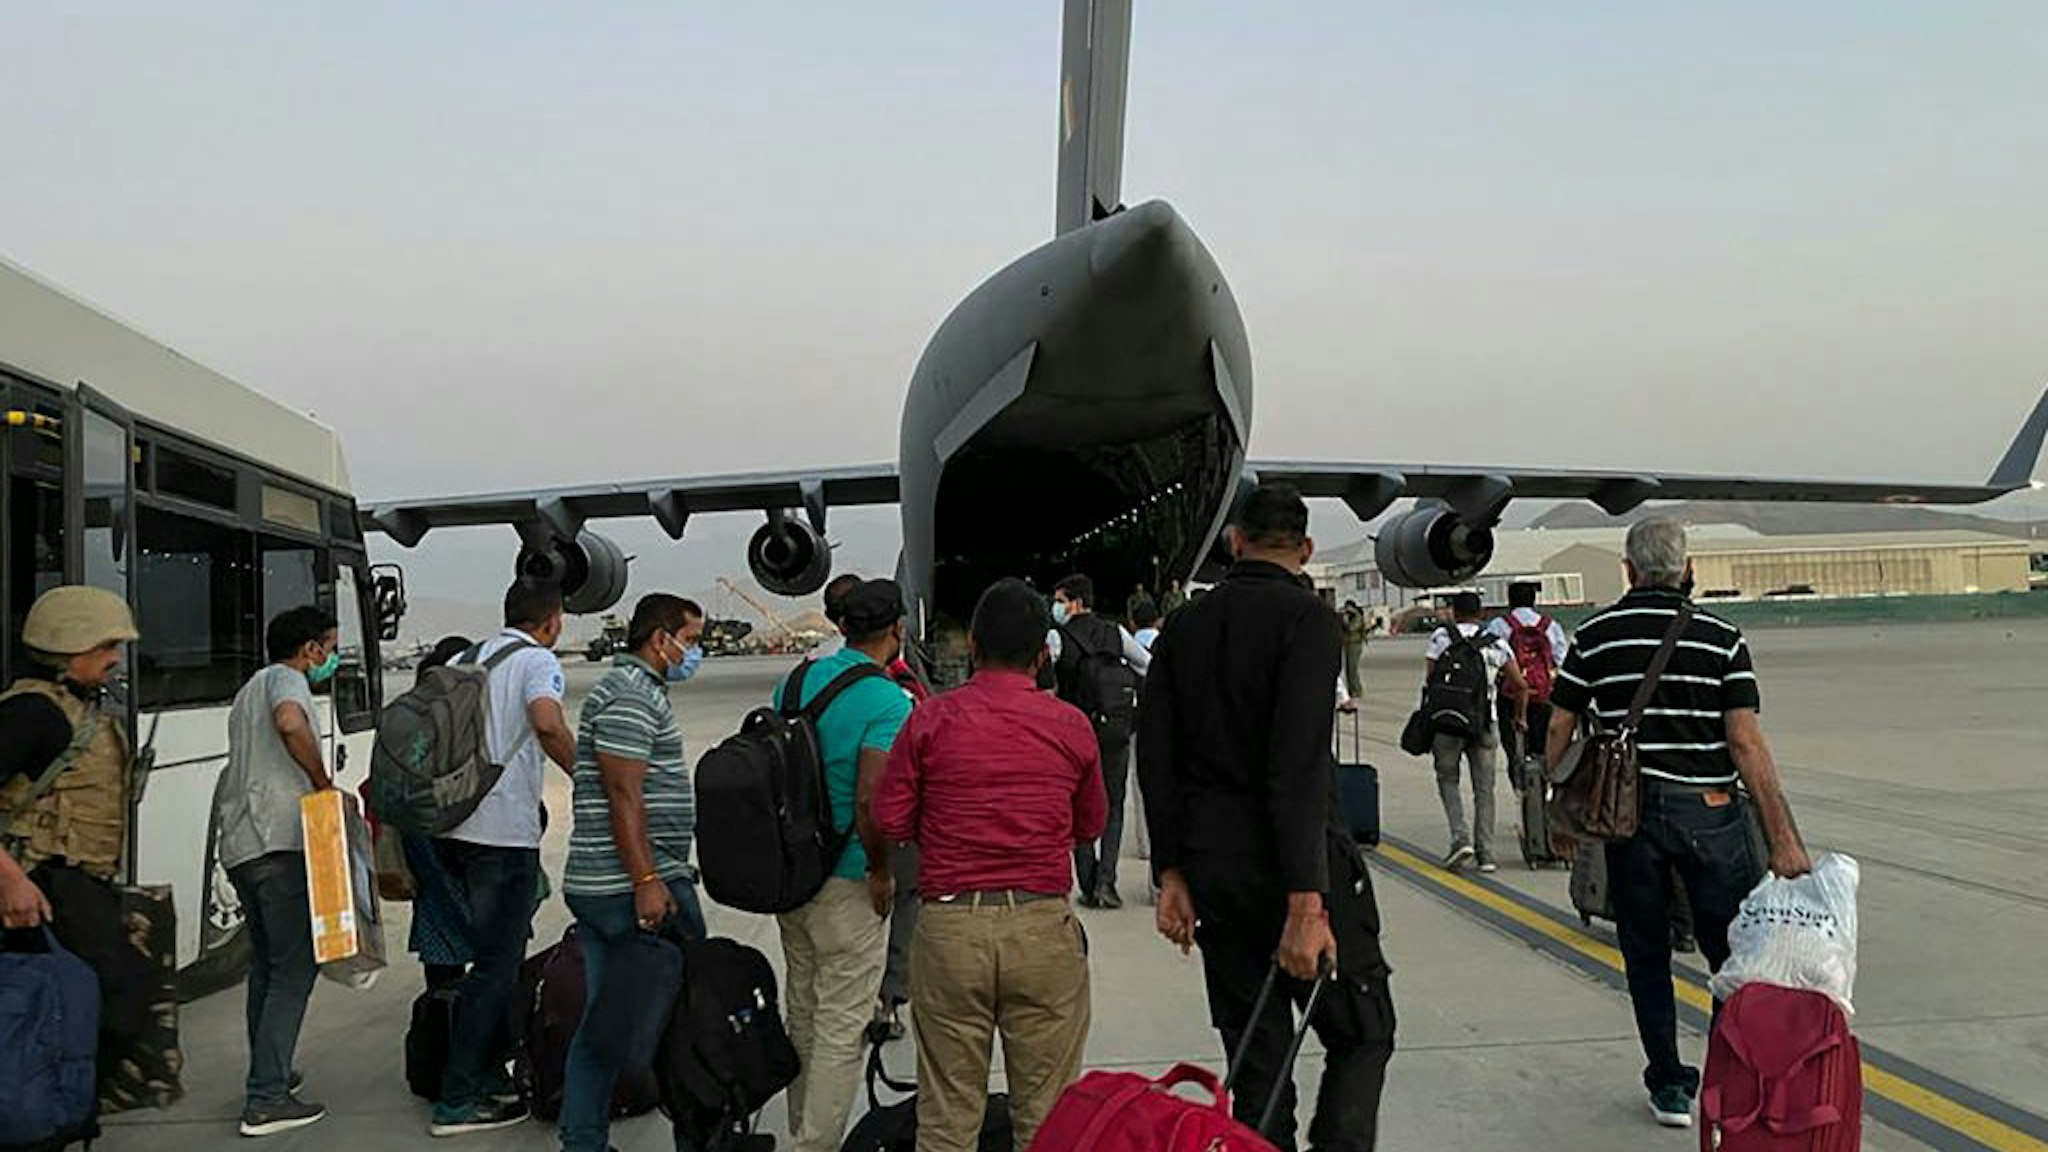 ndian nationals prepare to board an Indian military aircraft at the airport in Kabul on August 17, 2021 to be evacuated after the Taliban stunning takeover of Afghanistan. (Photo by STR / AFP) (Photo by STR/AFP via Getty Images)